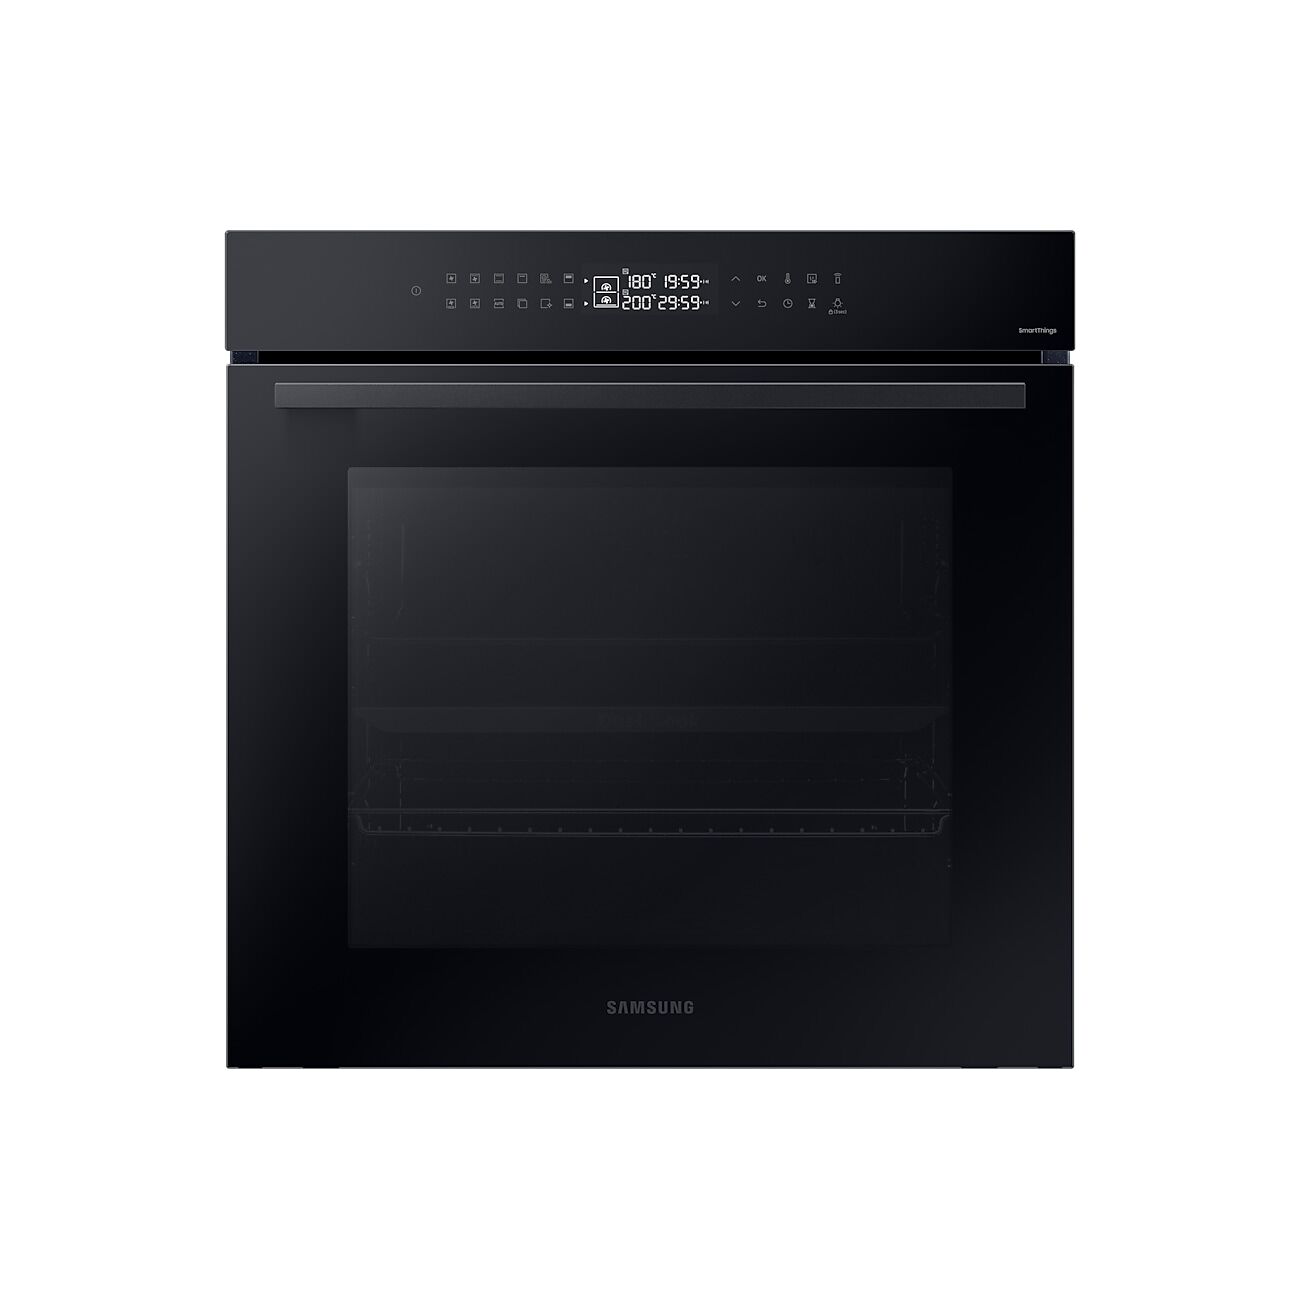 Samsung NV7B42205AK Series 4 Smart Oven with Dual Cook in Black